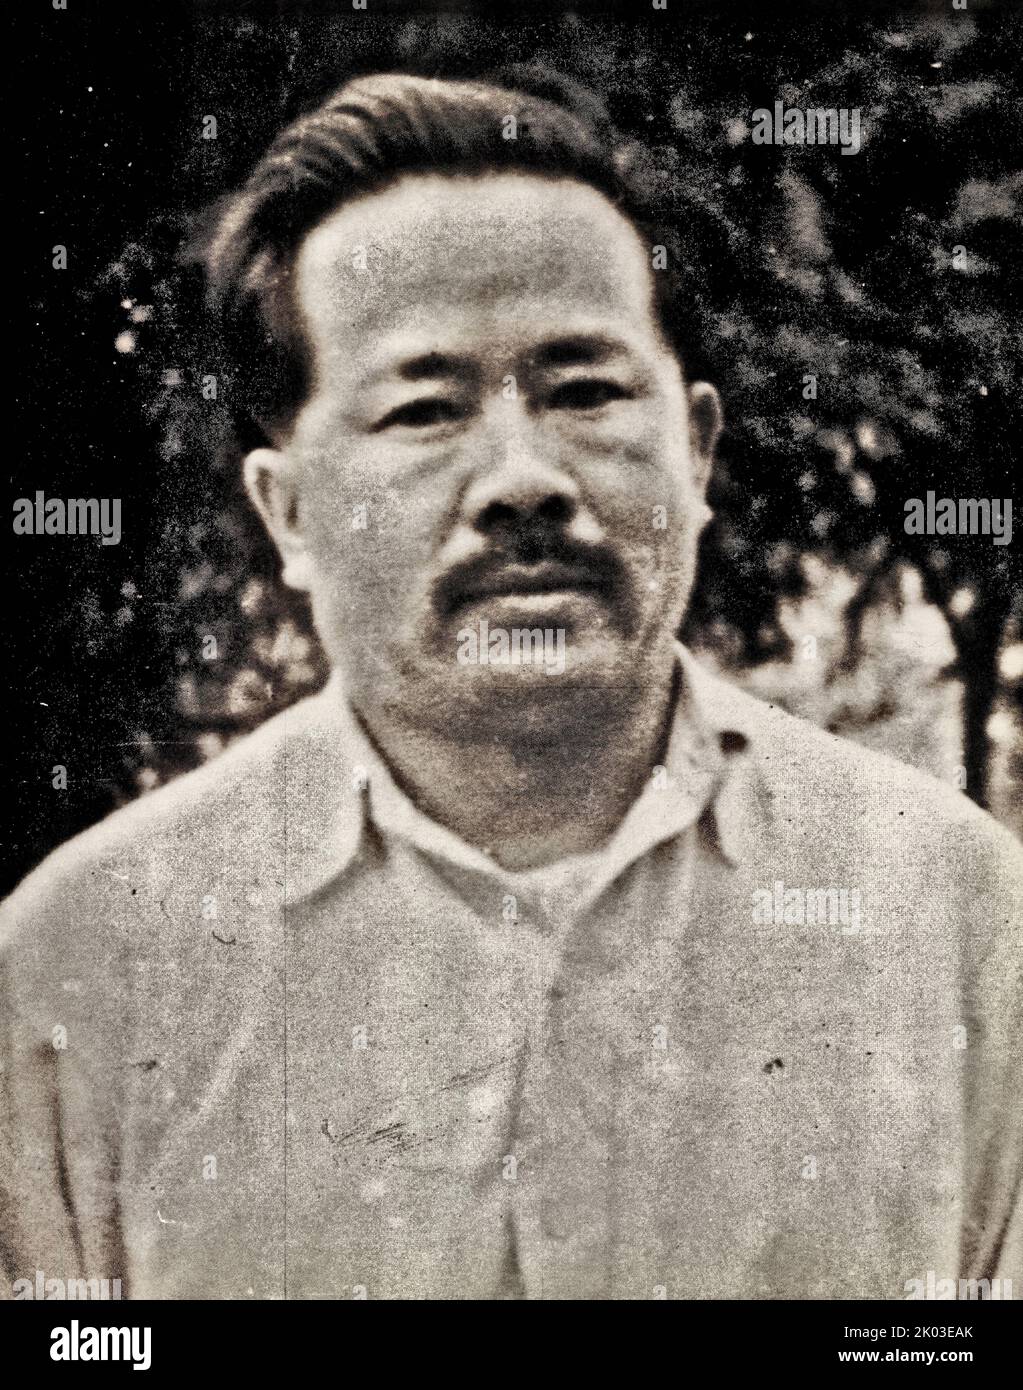 Ren Bishi when he moved to northern Shaanxi. In 1937. Ren Bishi was a military and political leader in the early Chinese Communist Party. In the early 1930s, Stock Photo